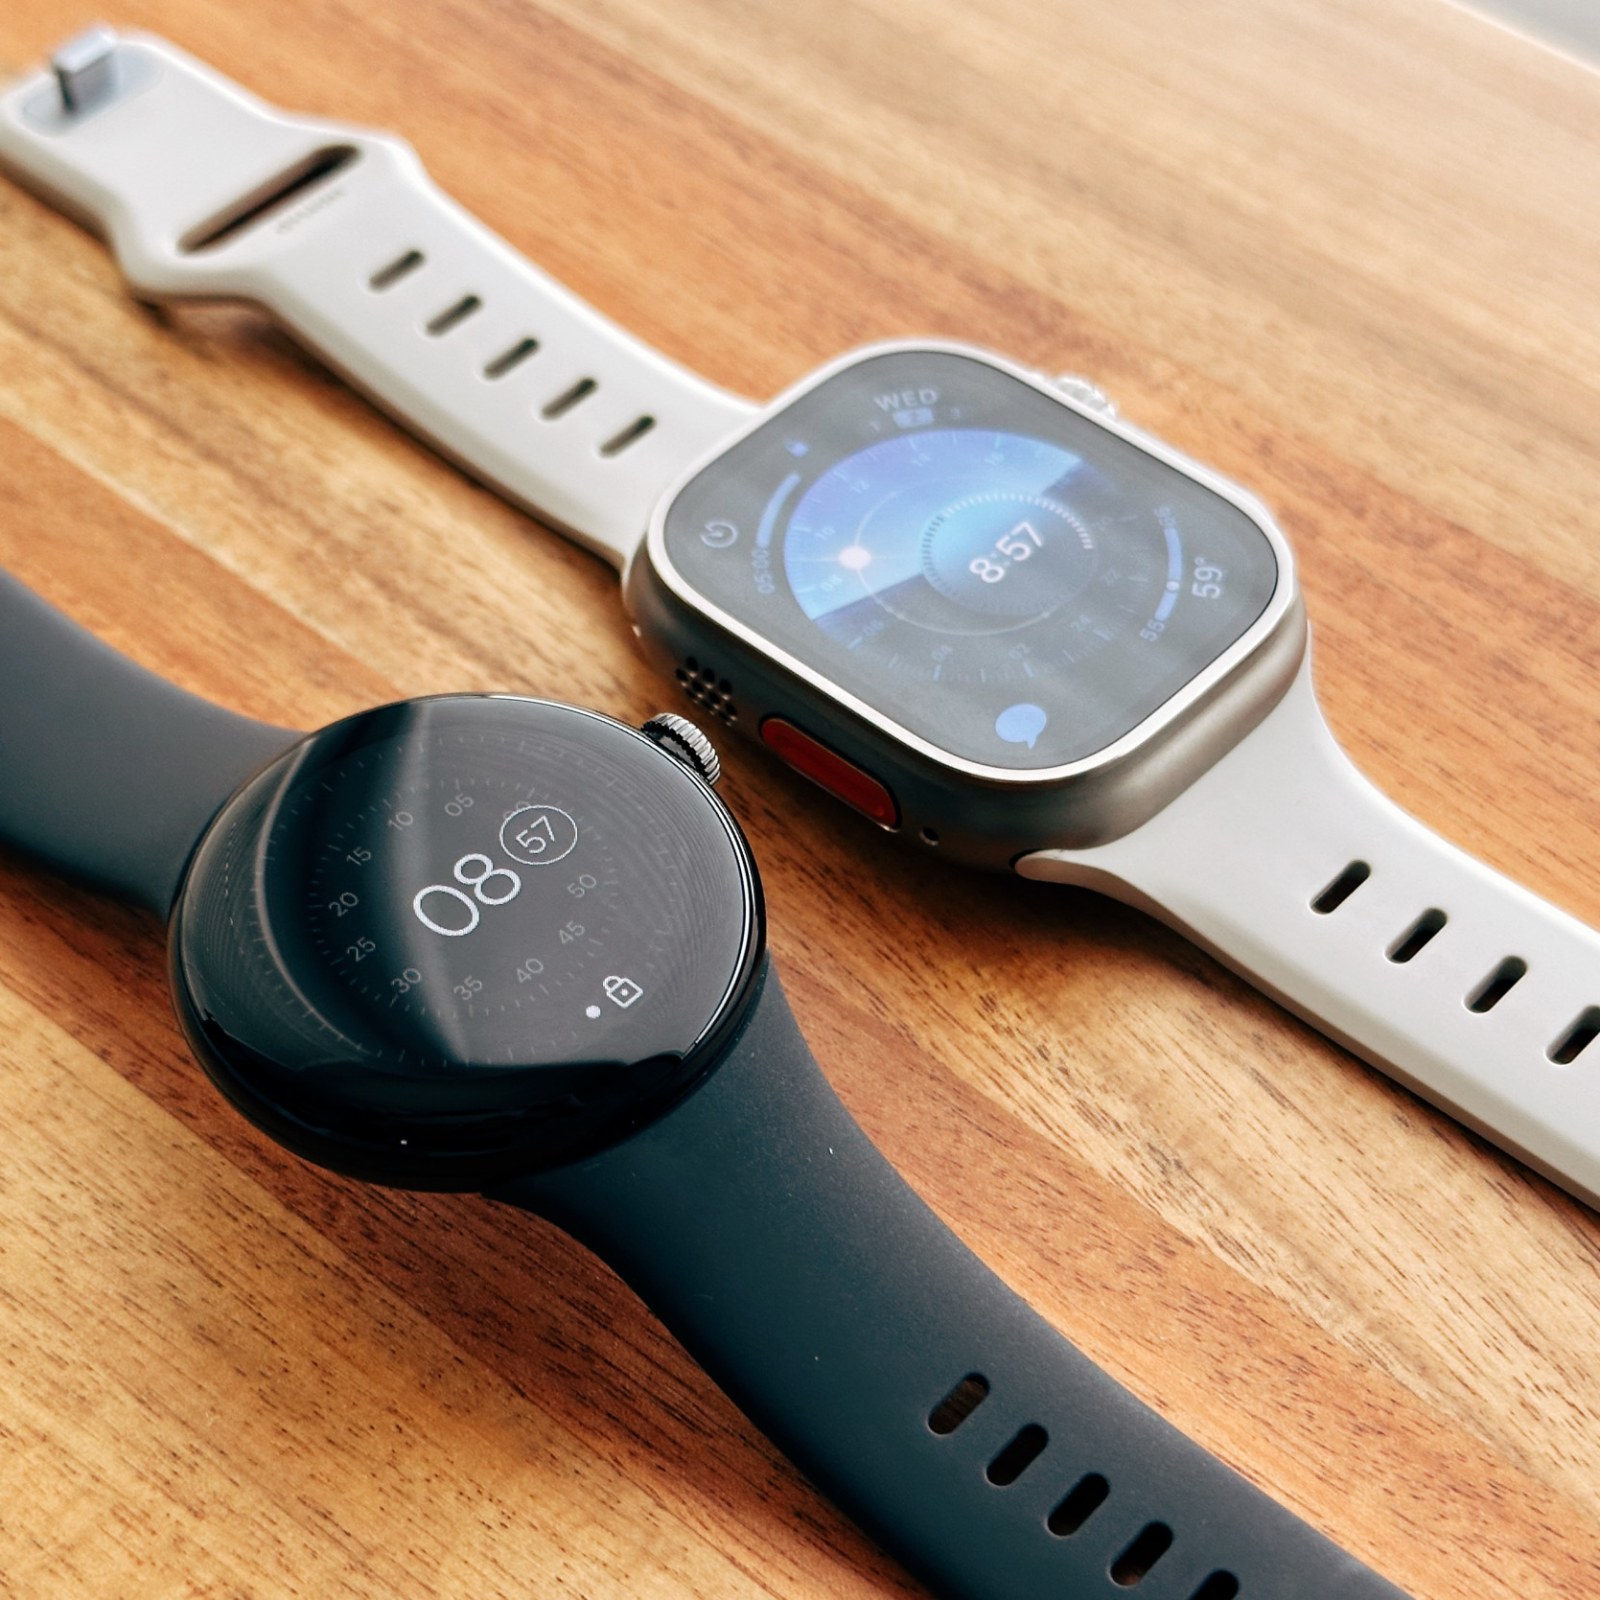 entusiastisk Sikker Overleve Thoughts on Google Pixel Watch From a Longtime Apple Watch Wearer